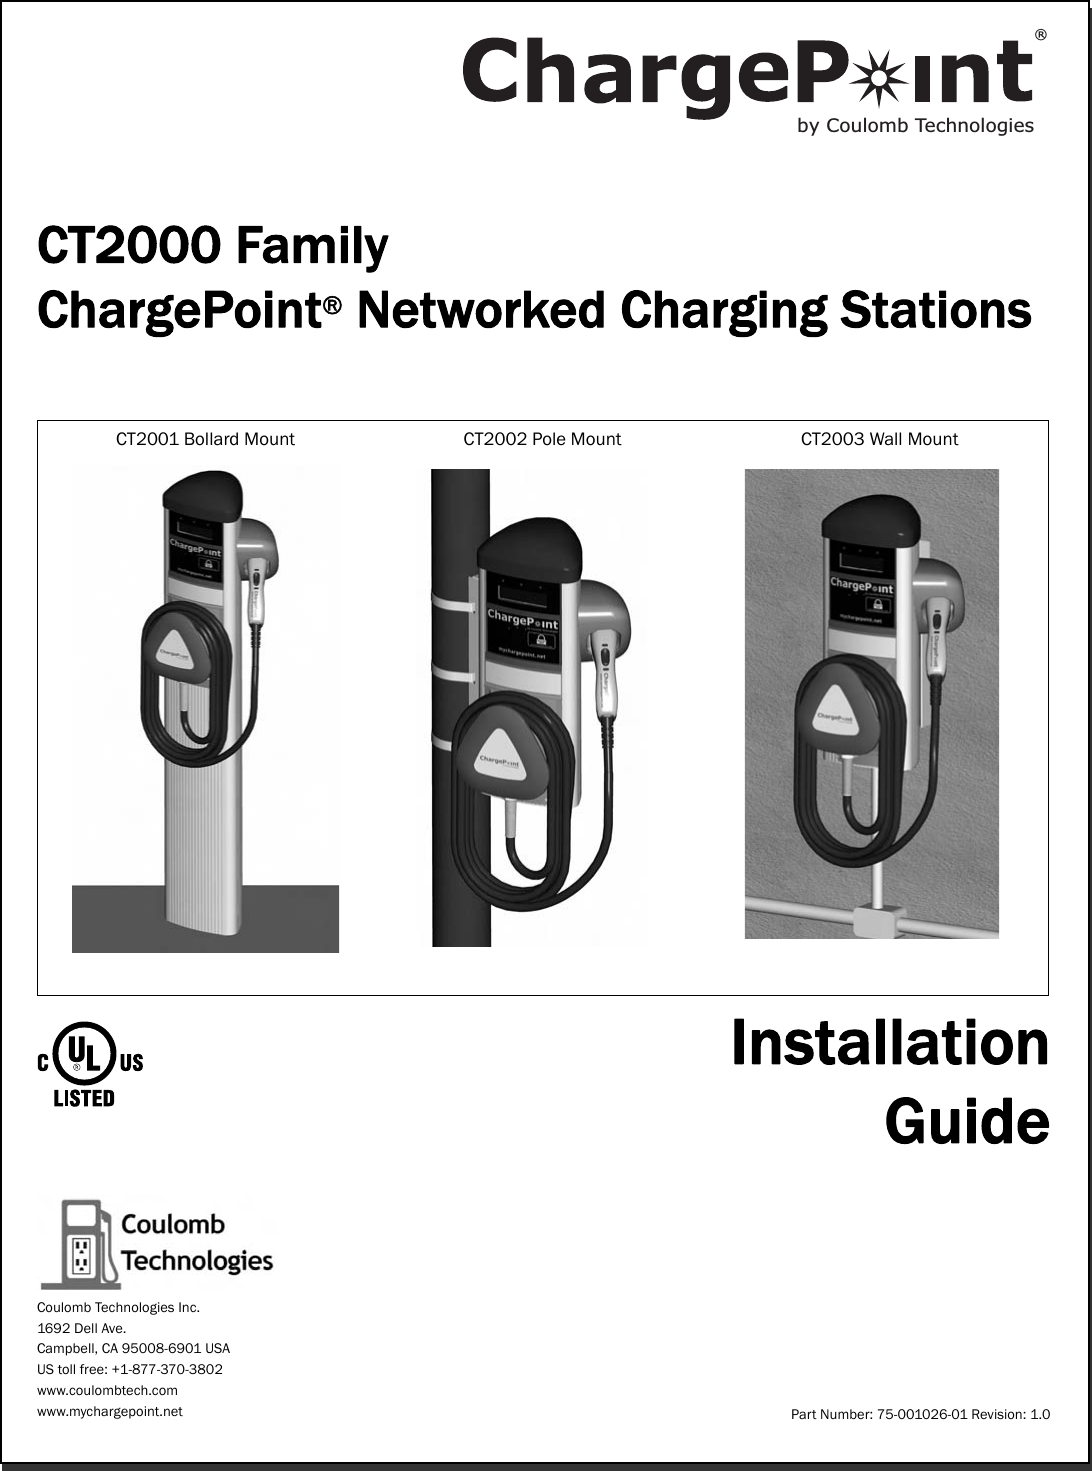 CT2000 FamilyChargePoint® Networked Charging StationsCT2001 Bollard Mount CT2002 Pole Mount CT2003 Wall MountInstallationGuidePart Number: 75-001026-01 Revision: 1.0Coulomb Technologies Inc.1692 Dell Ave.Campbell, CA 95008-6901 USAUS toll free: +1-877-370-3802www.coulombtech.comwww.mychargepoint.netby Coulomb Technologies® 